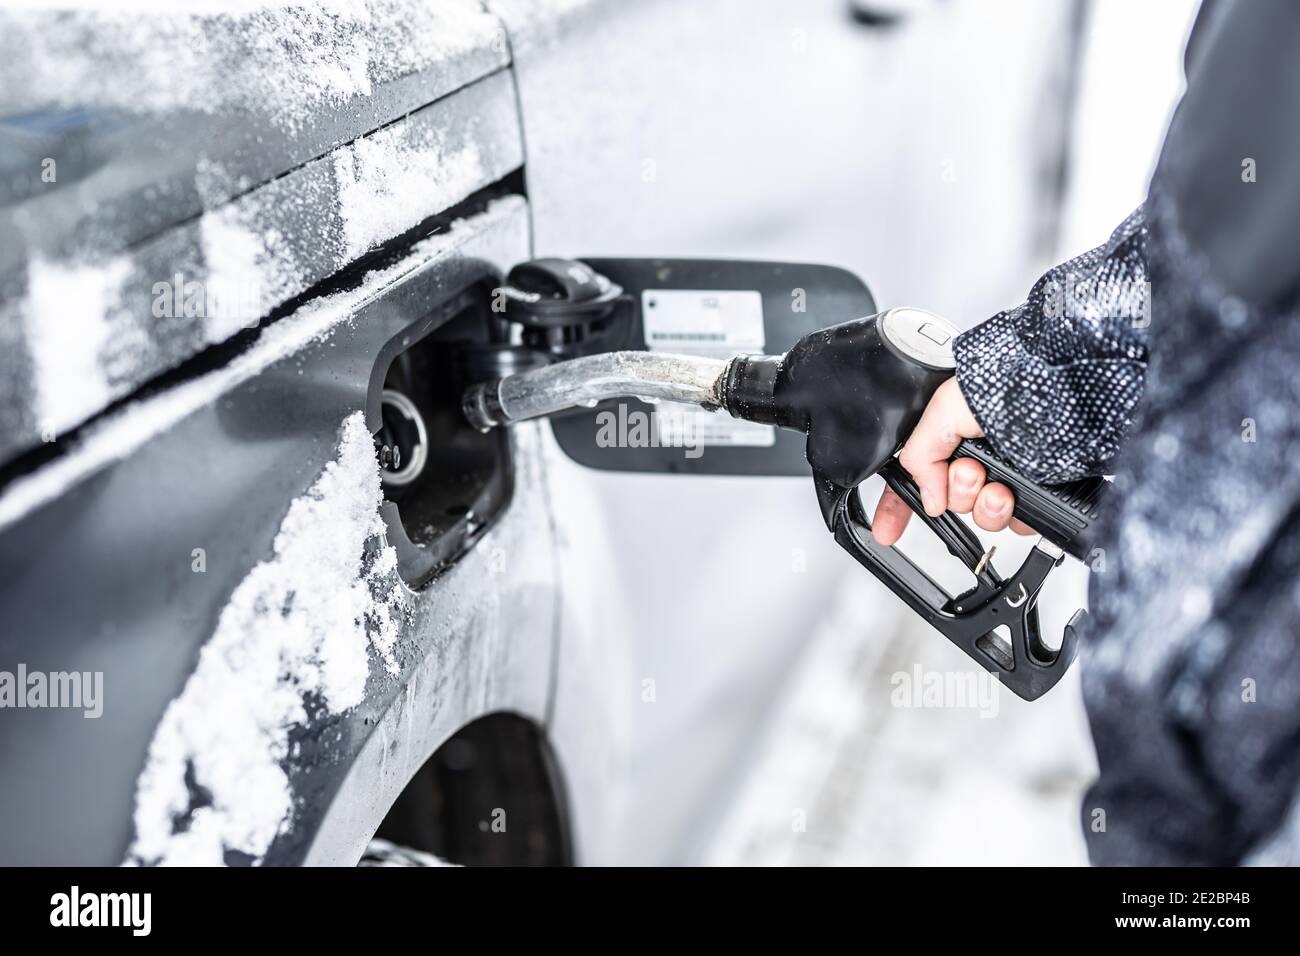 Hand of a man filling up the fuel tank of his car during freezing snowy winter. Stock Photo